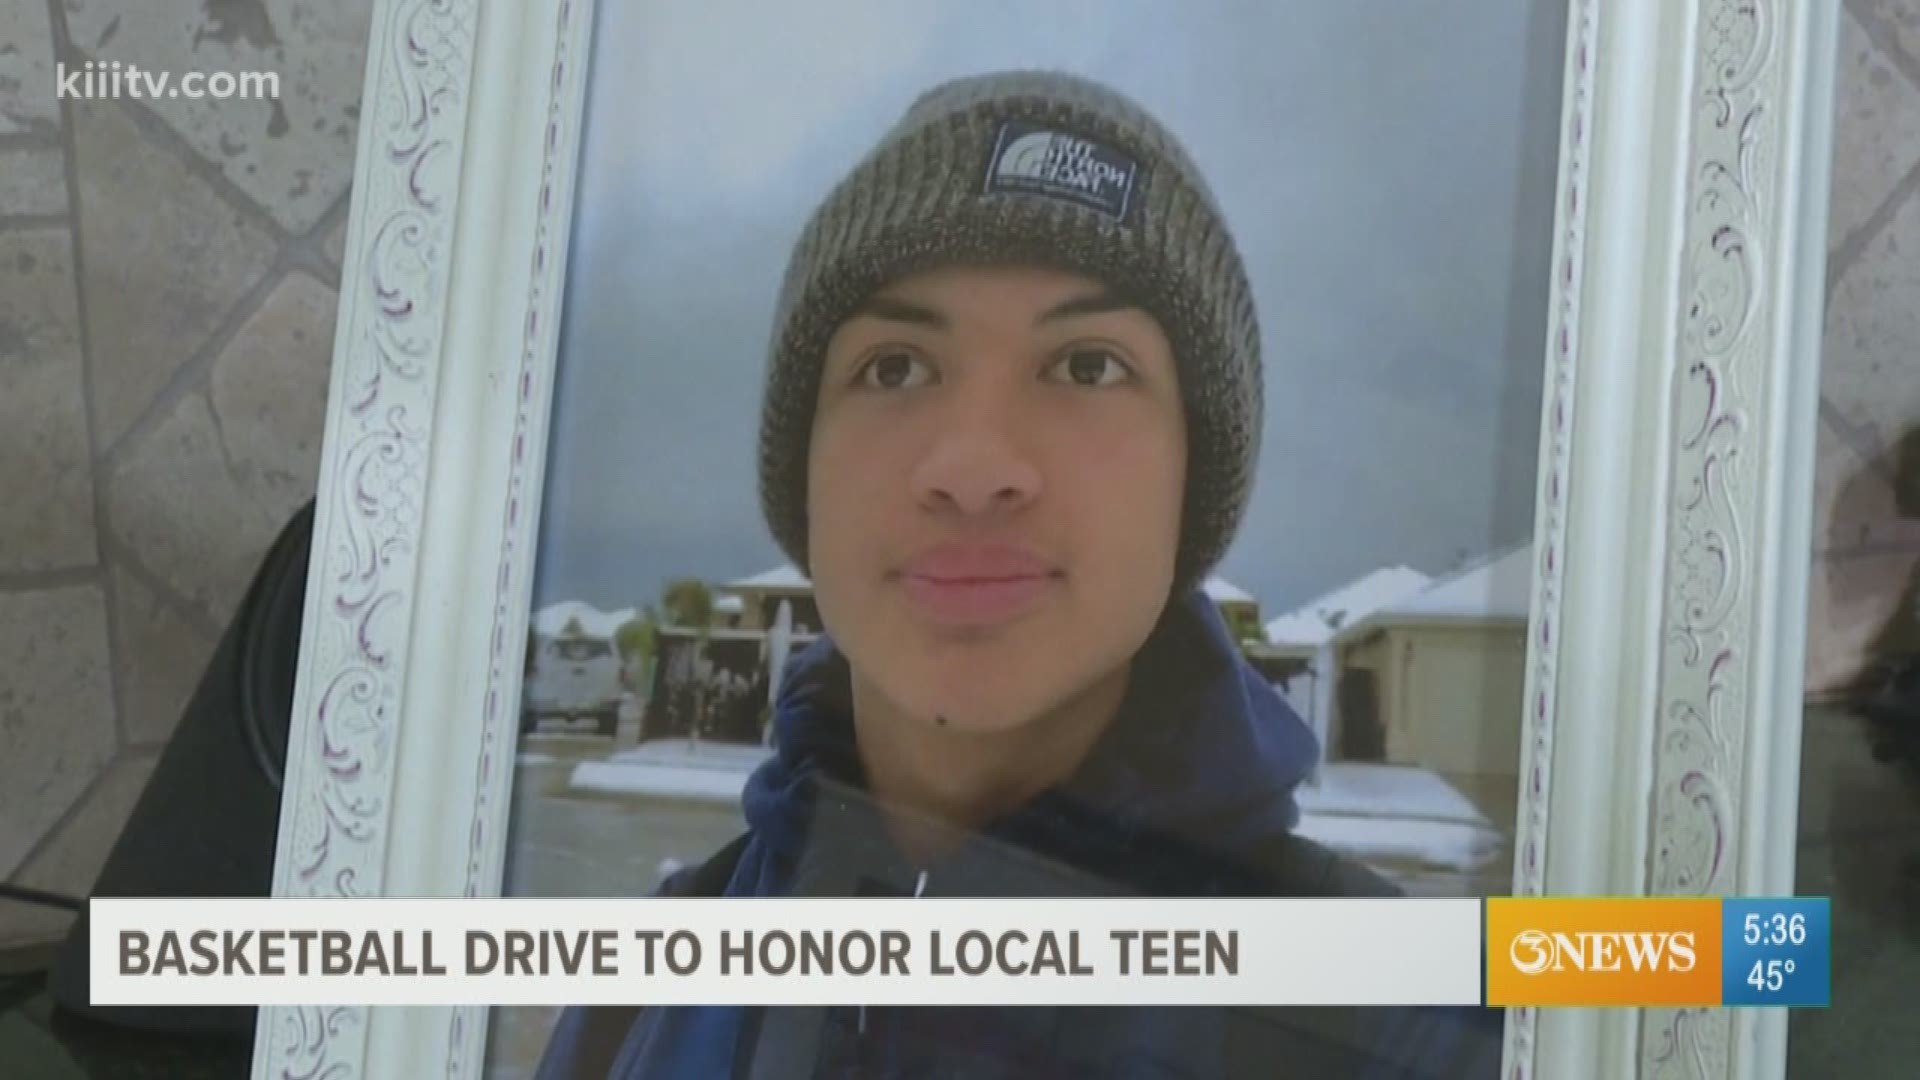 A Coastal Bend teen who took his own life is being honored by his mother through a drive to raise awareness on teen suicide.